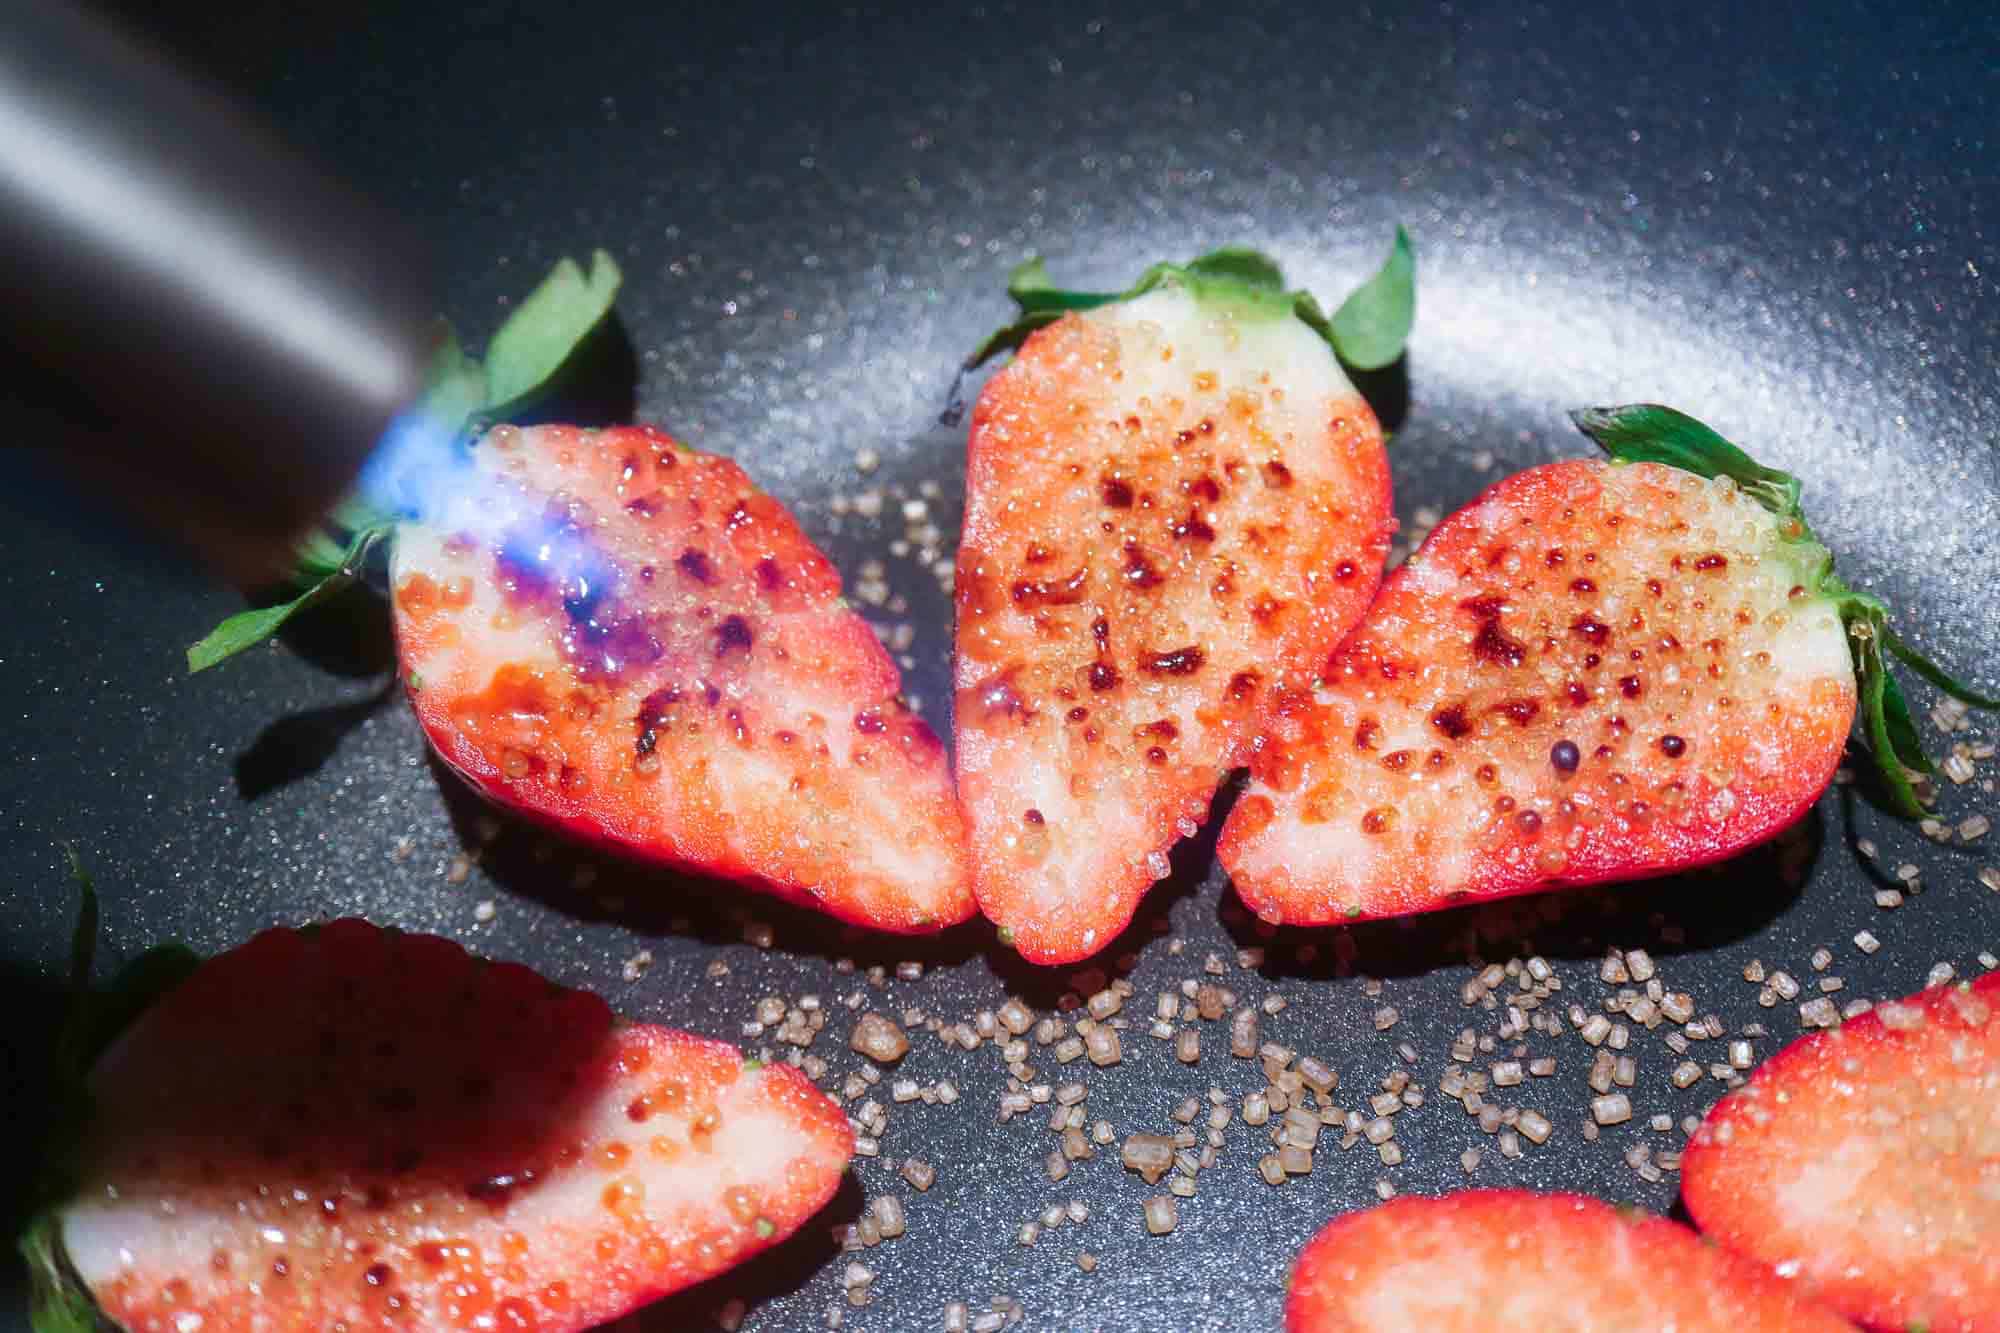 Caramelize the strawberries